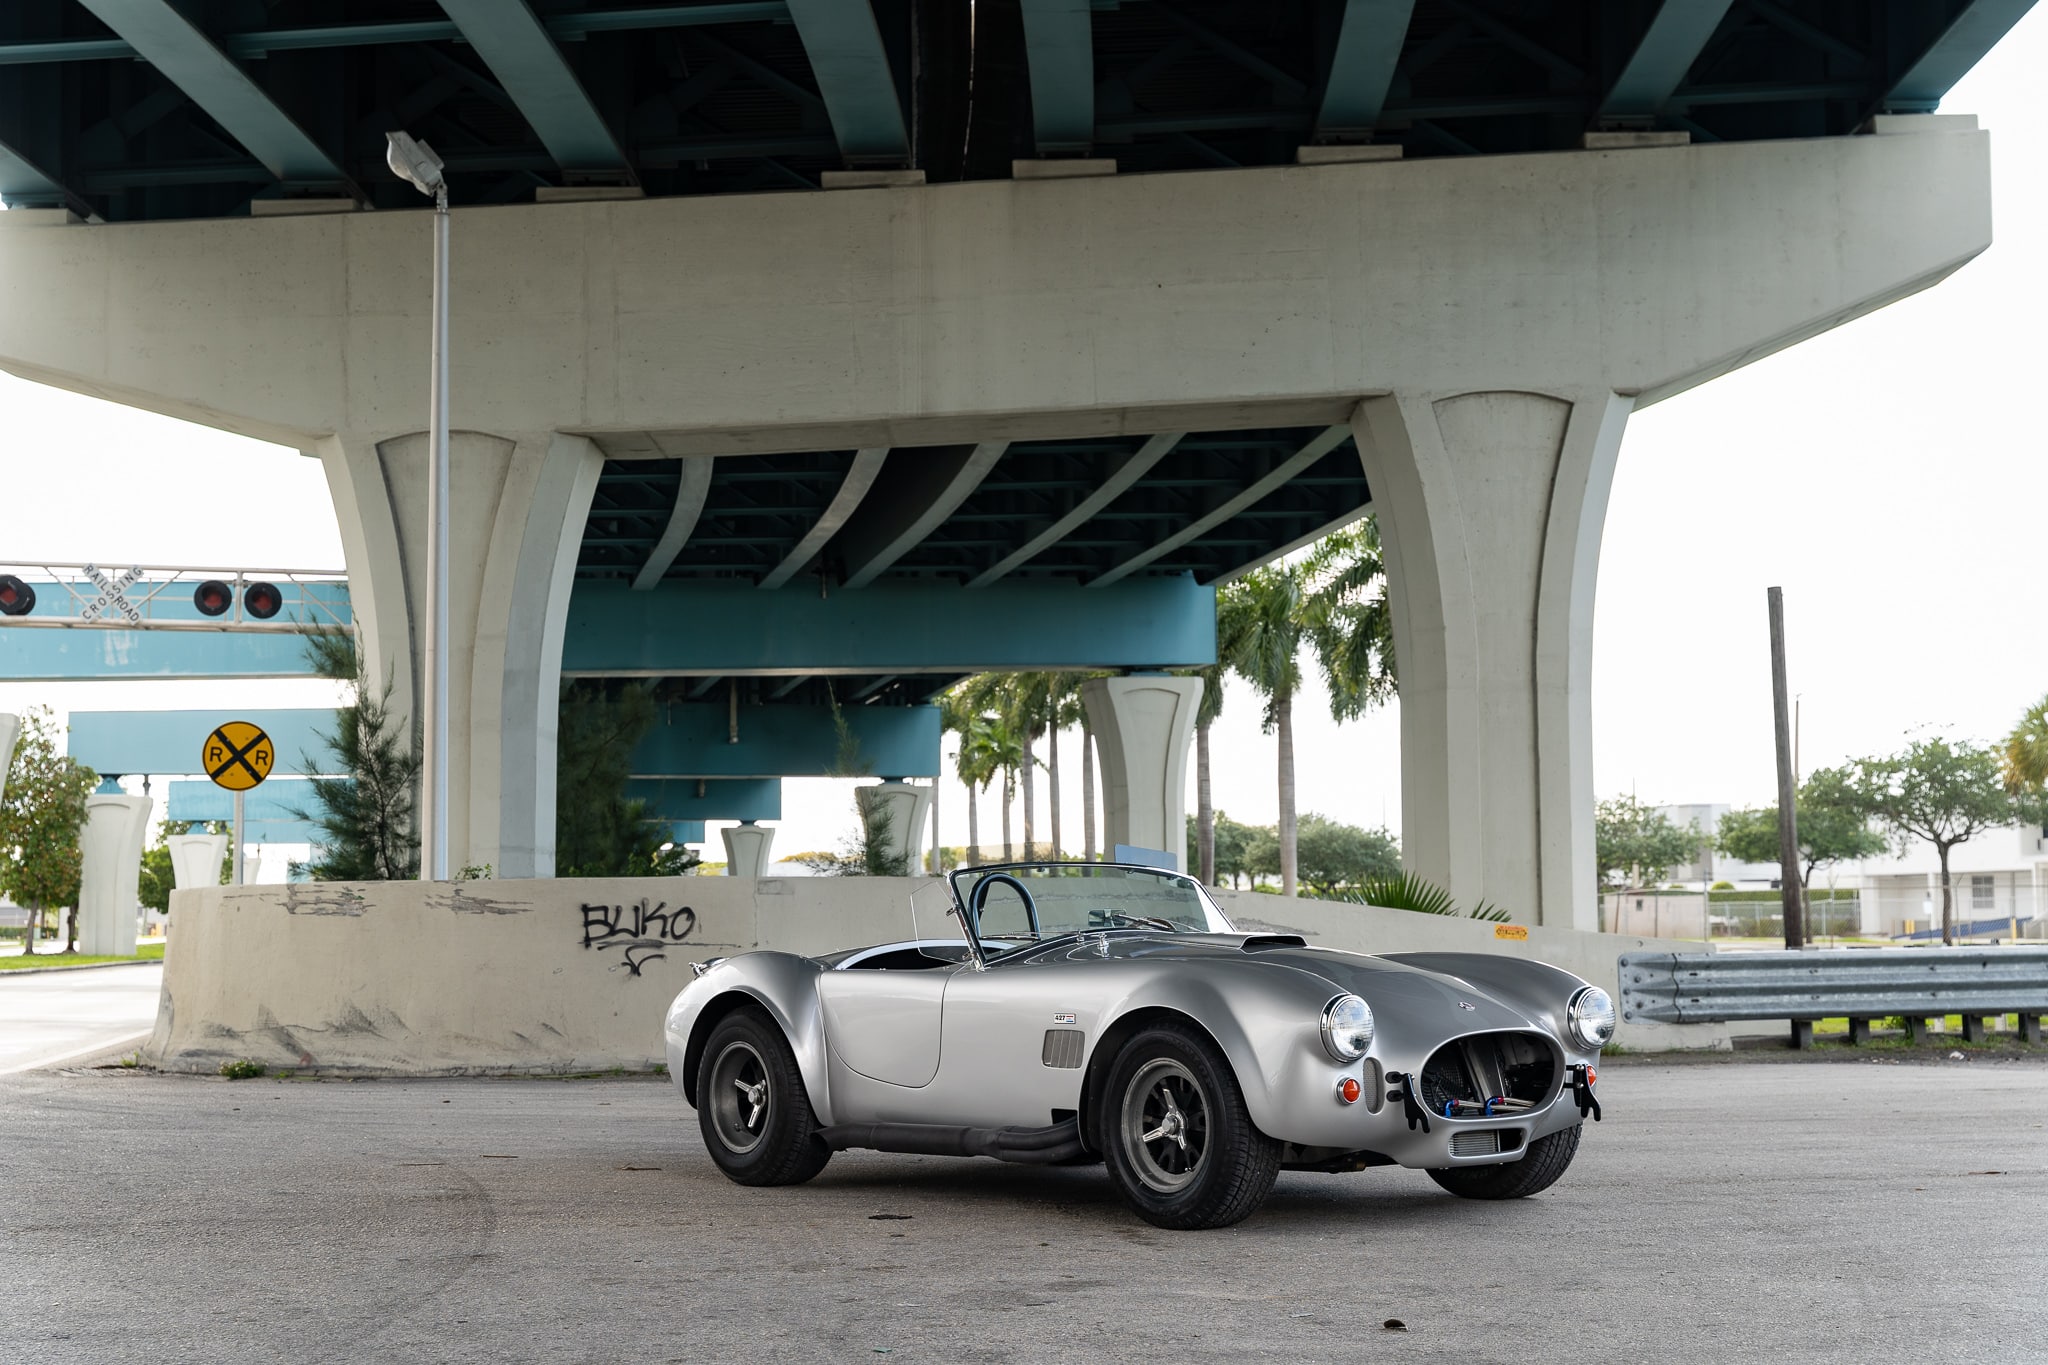 1965 Shelby Cobra 427 S/C Gentry Motor Works – 1 of 40 – 450 miles – MKIII Chassis – Gentry Motor Works – Halibrand Wheels